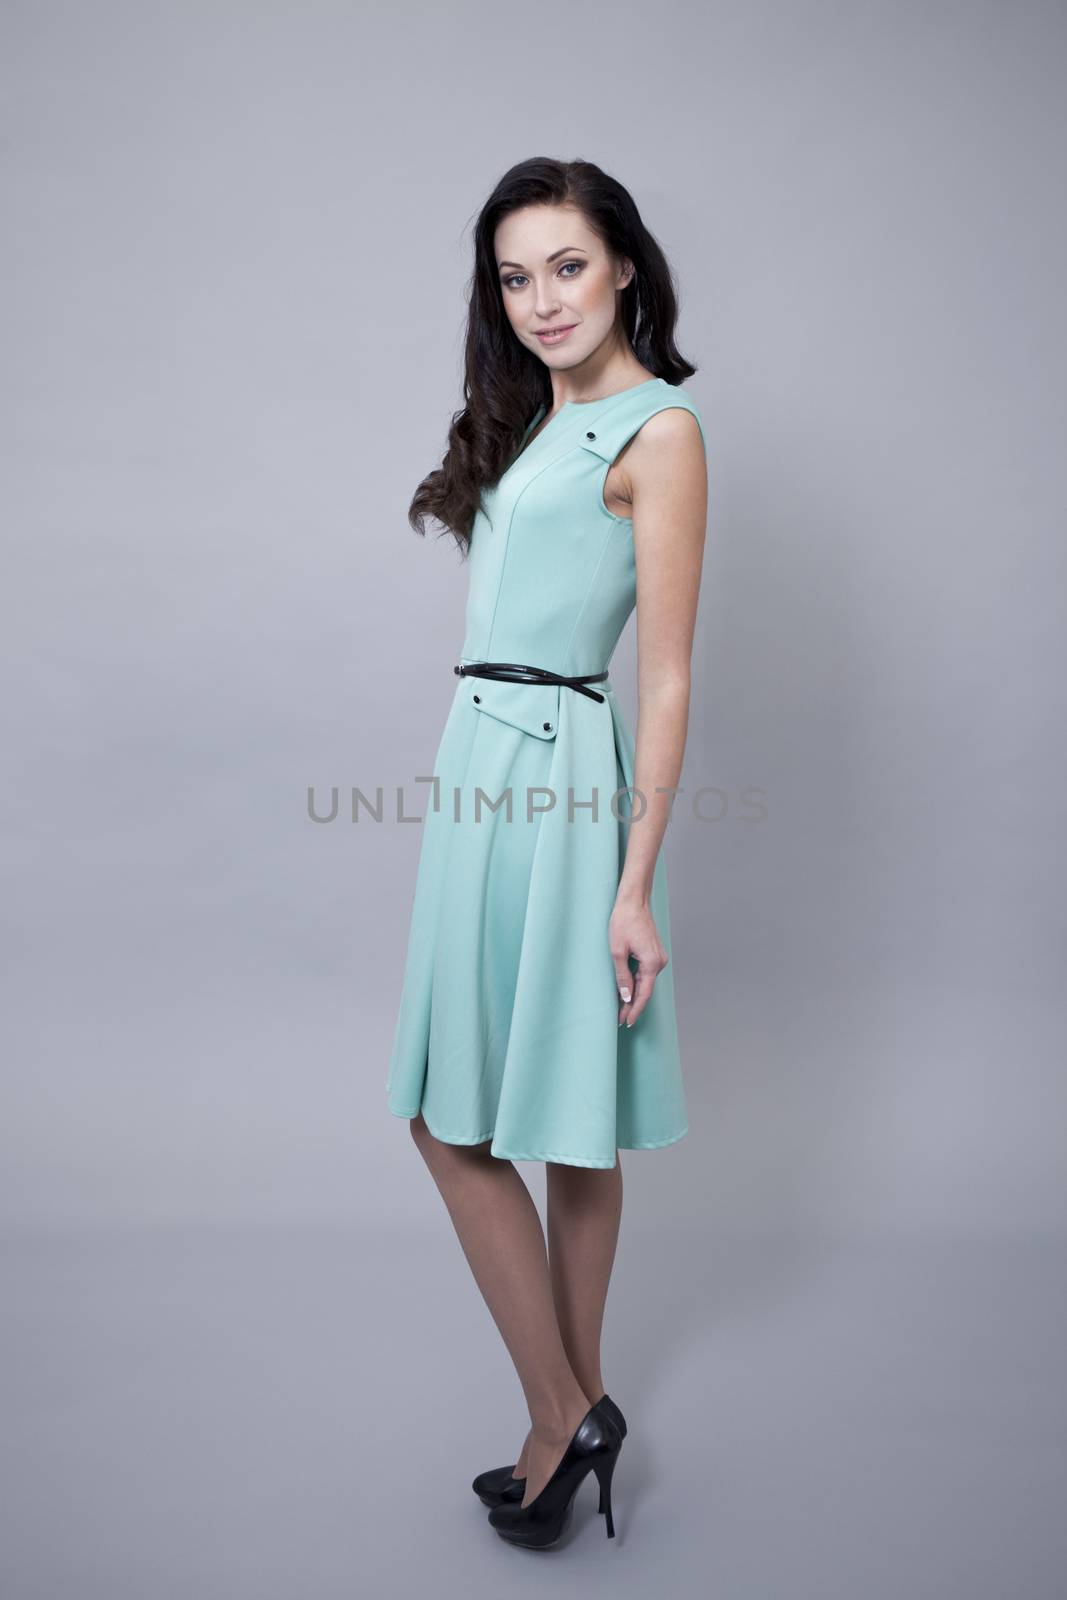 Beautiful young woman in a turquoise dress by andersonrise